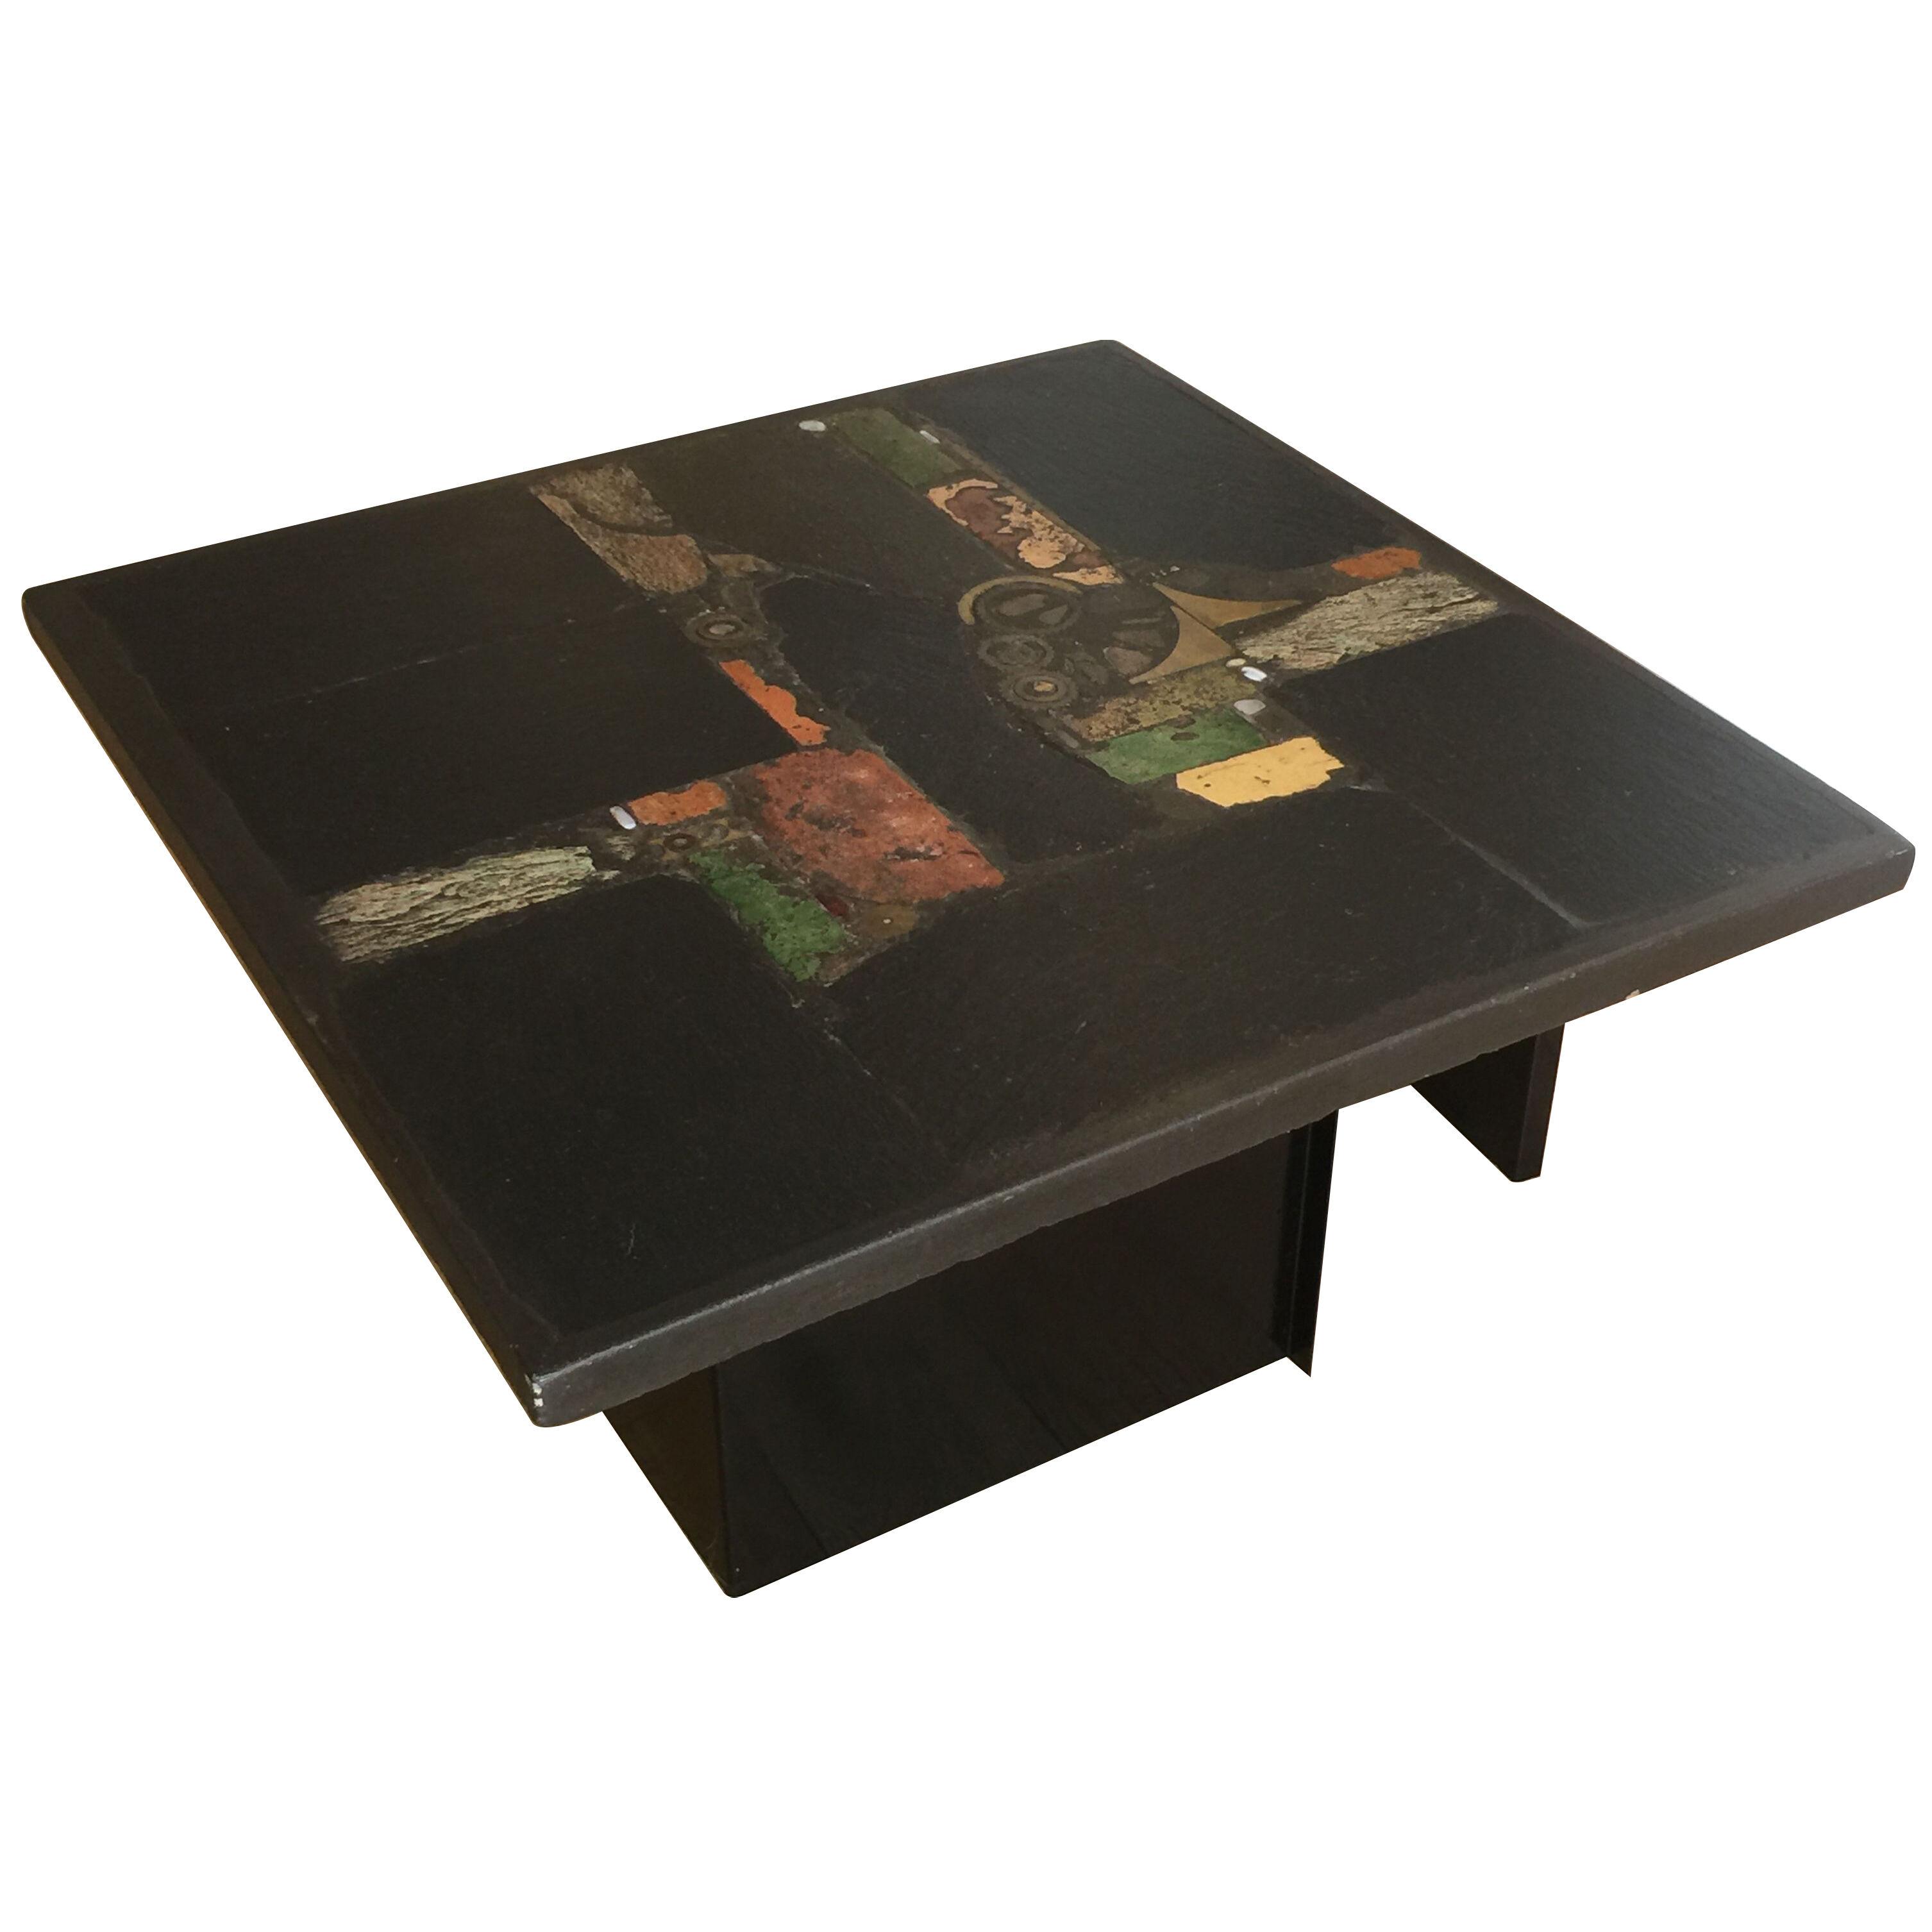 1970s Brutalist Coffee Table, attributed to Paul Kingma